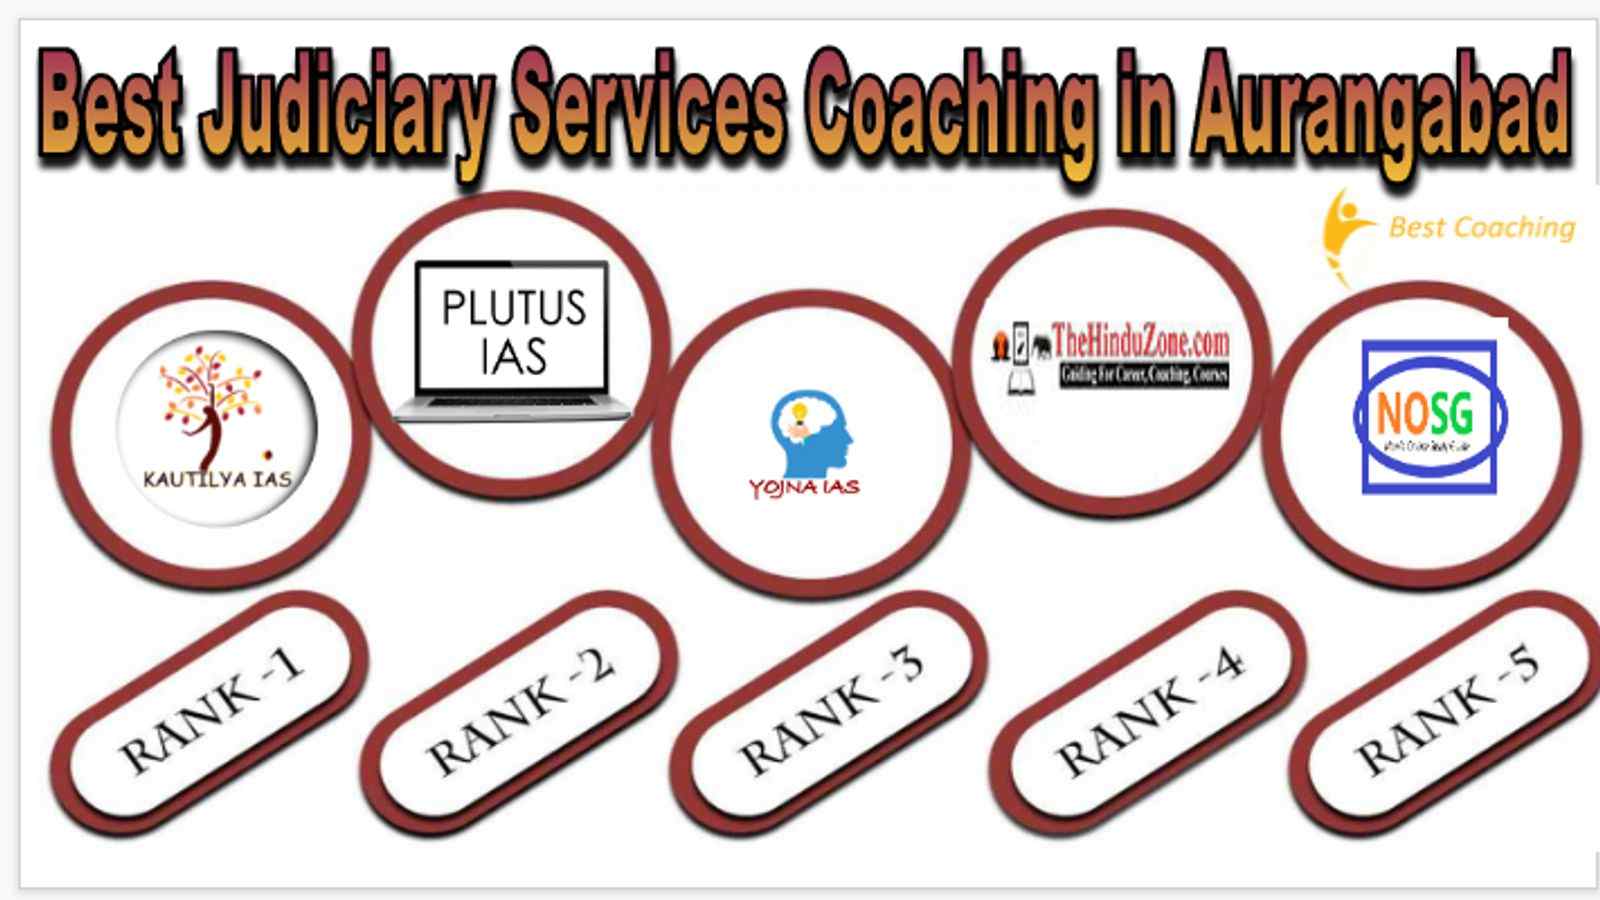 Best Judiciary Services Coaching in Aurangabad